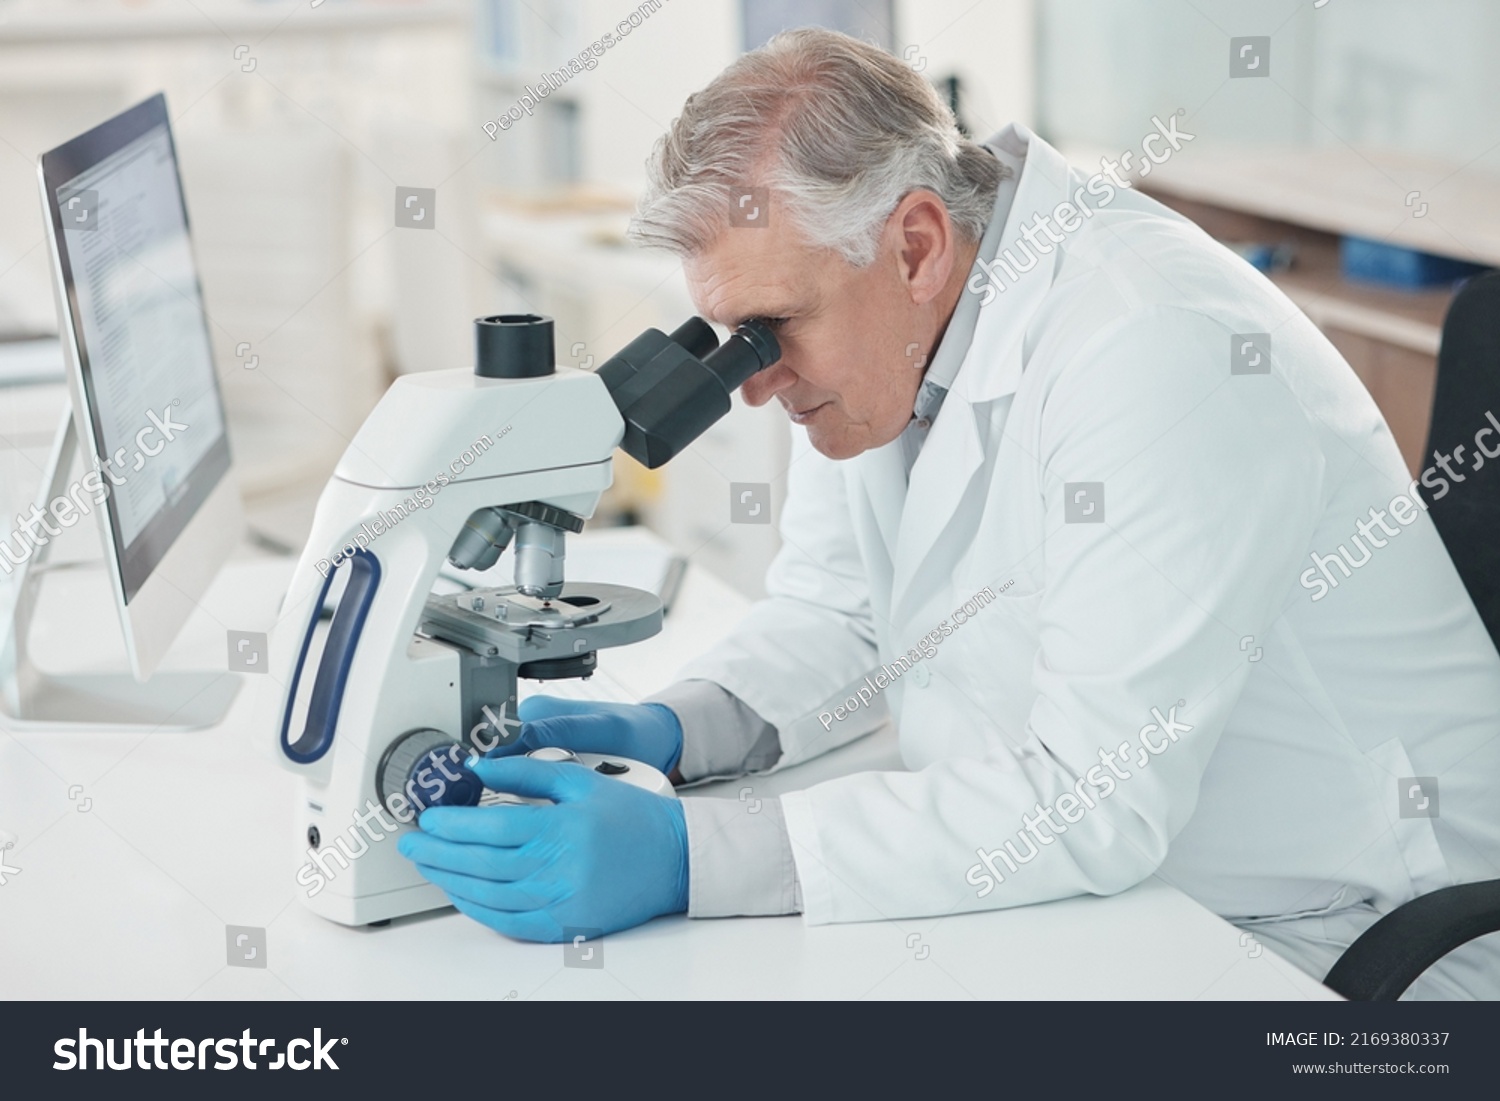 Theres a lot to take note of when magnified. Shot of a mature scientist using a microscope in a lab. #2169380337